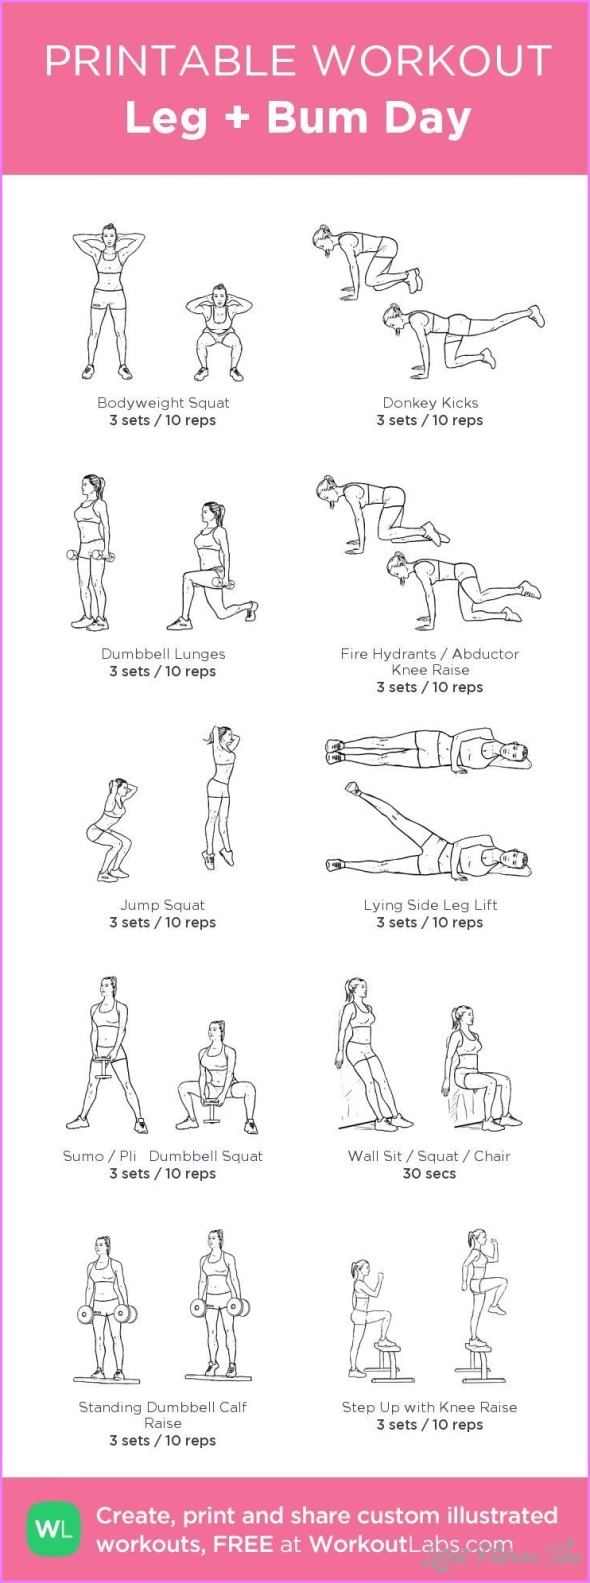 Weight Loss Exercise Routine For Men - LatestFashionTips.com